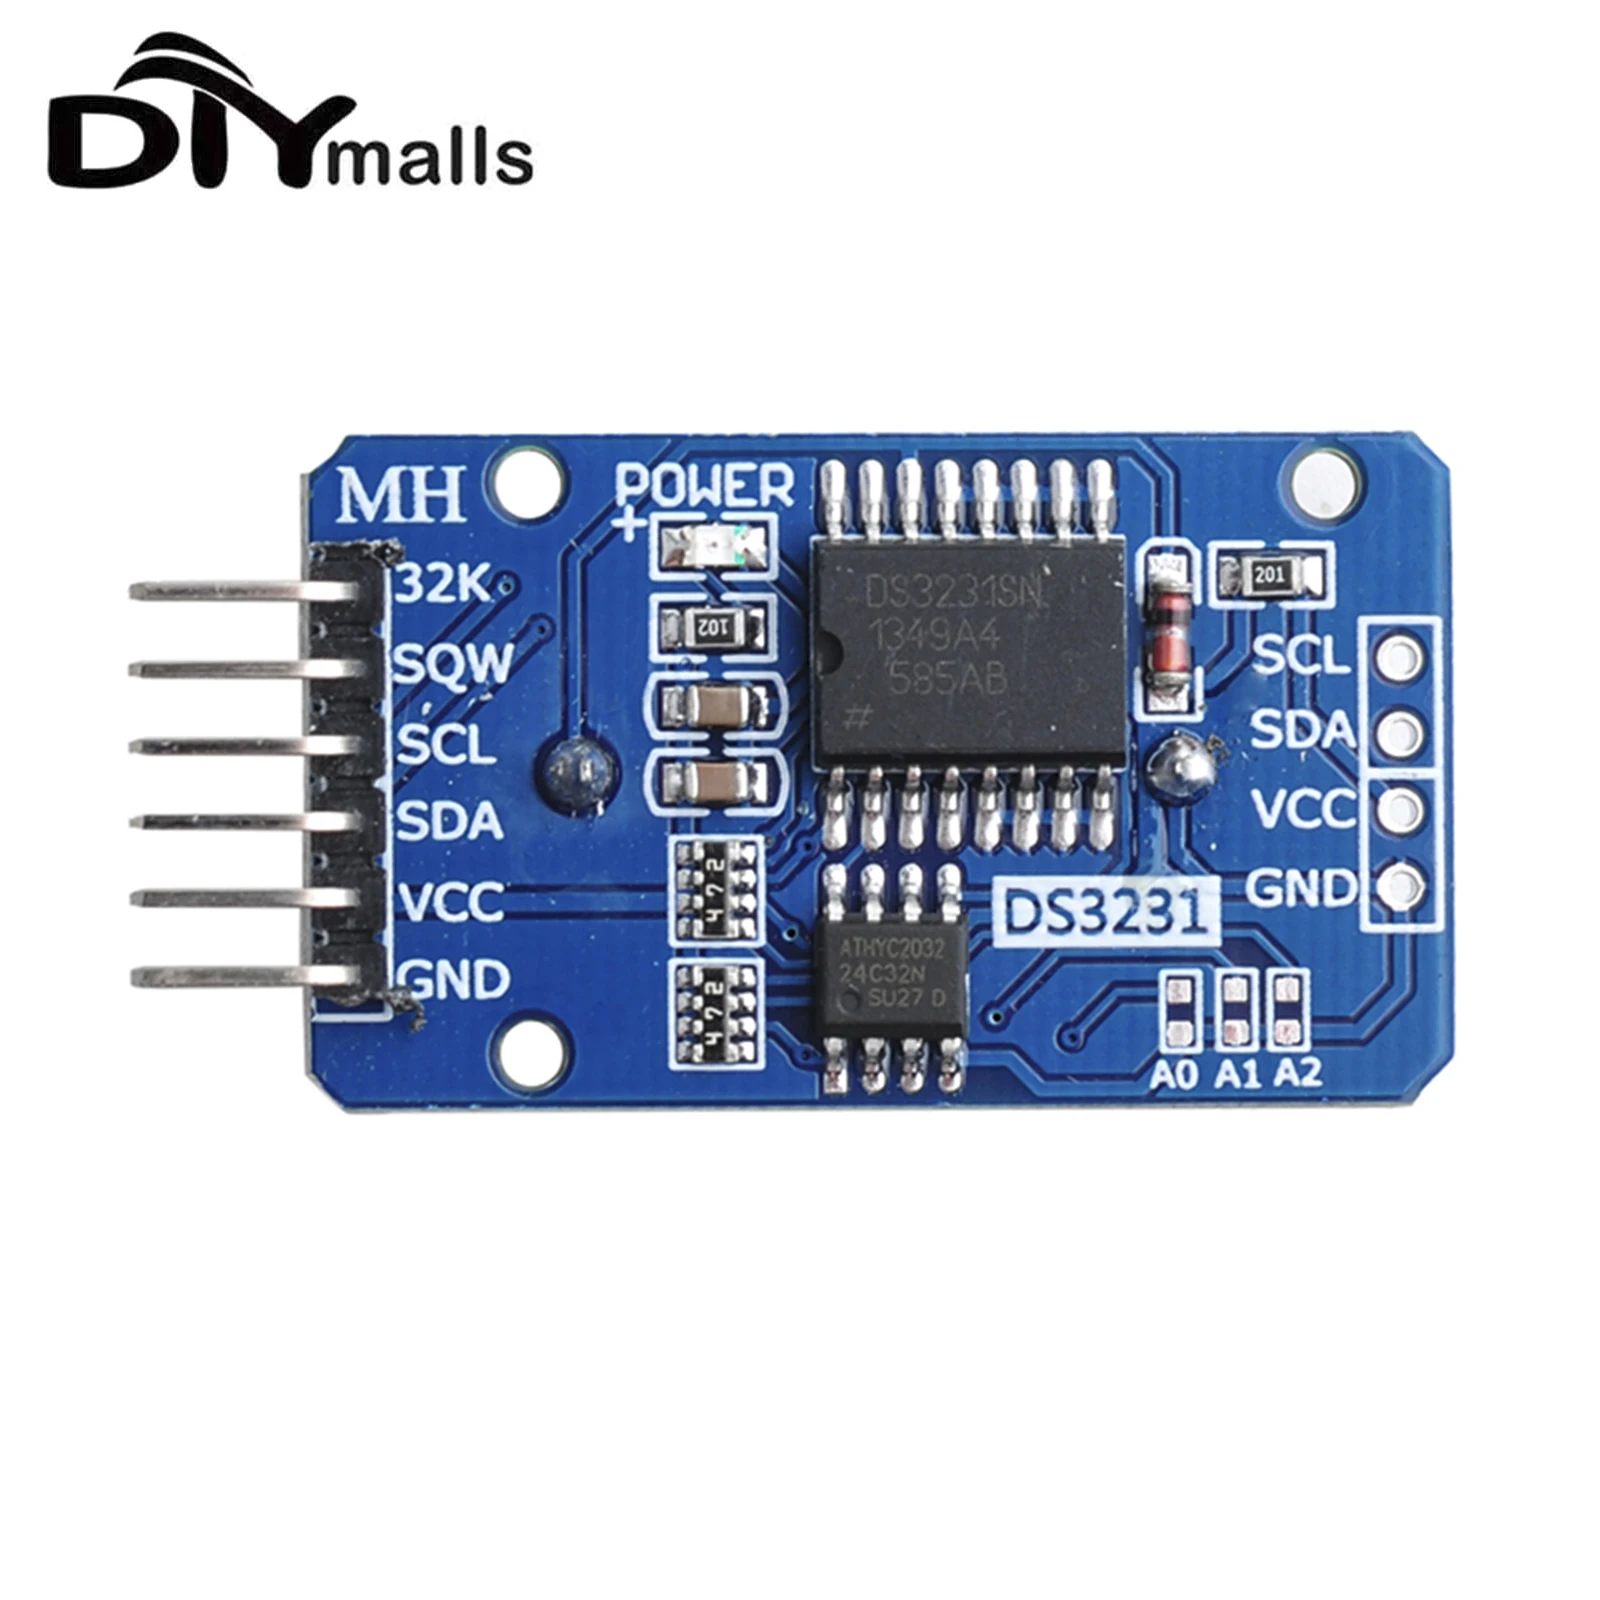 DS3231 AT24C32 IIC Module Precision Clock Module RTC DS3231SN Memory Module for Arduino (without battery) real time clock module rtc ds3231 rtc module ds3231 ic